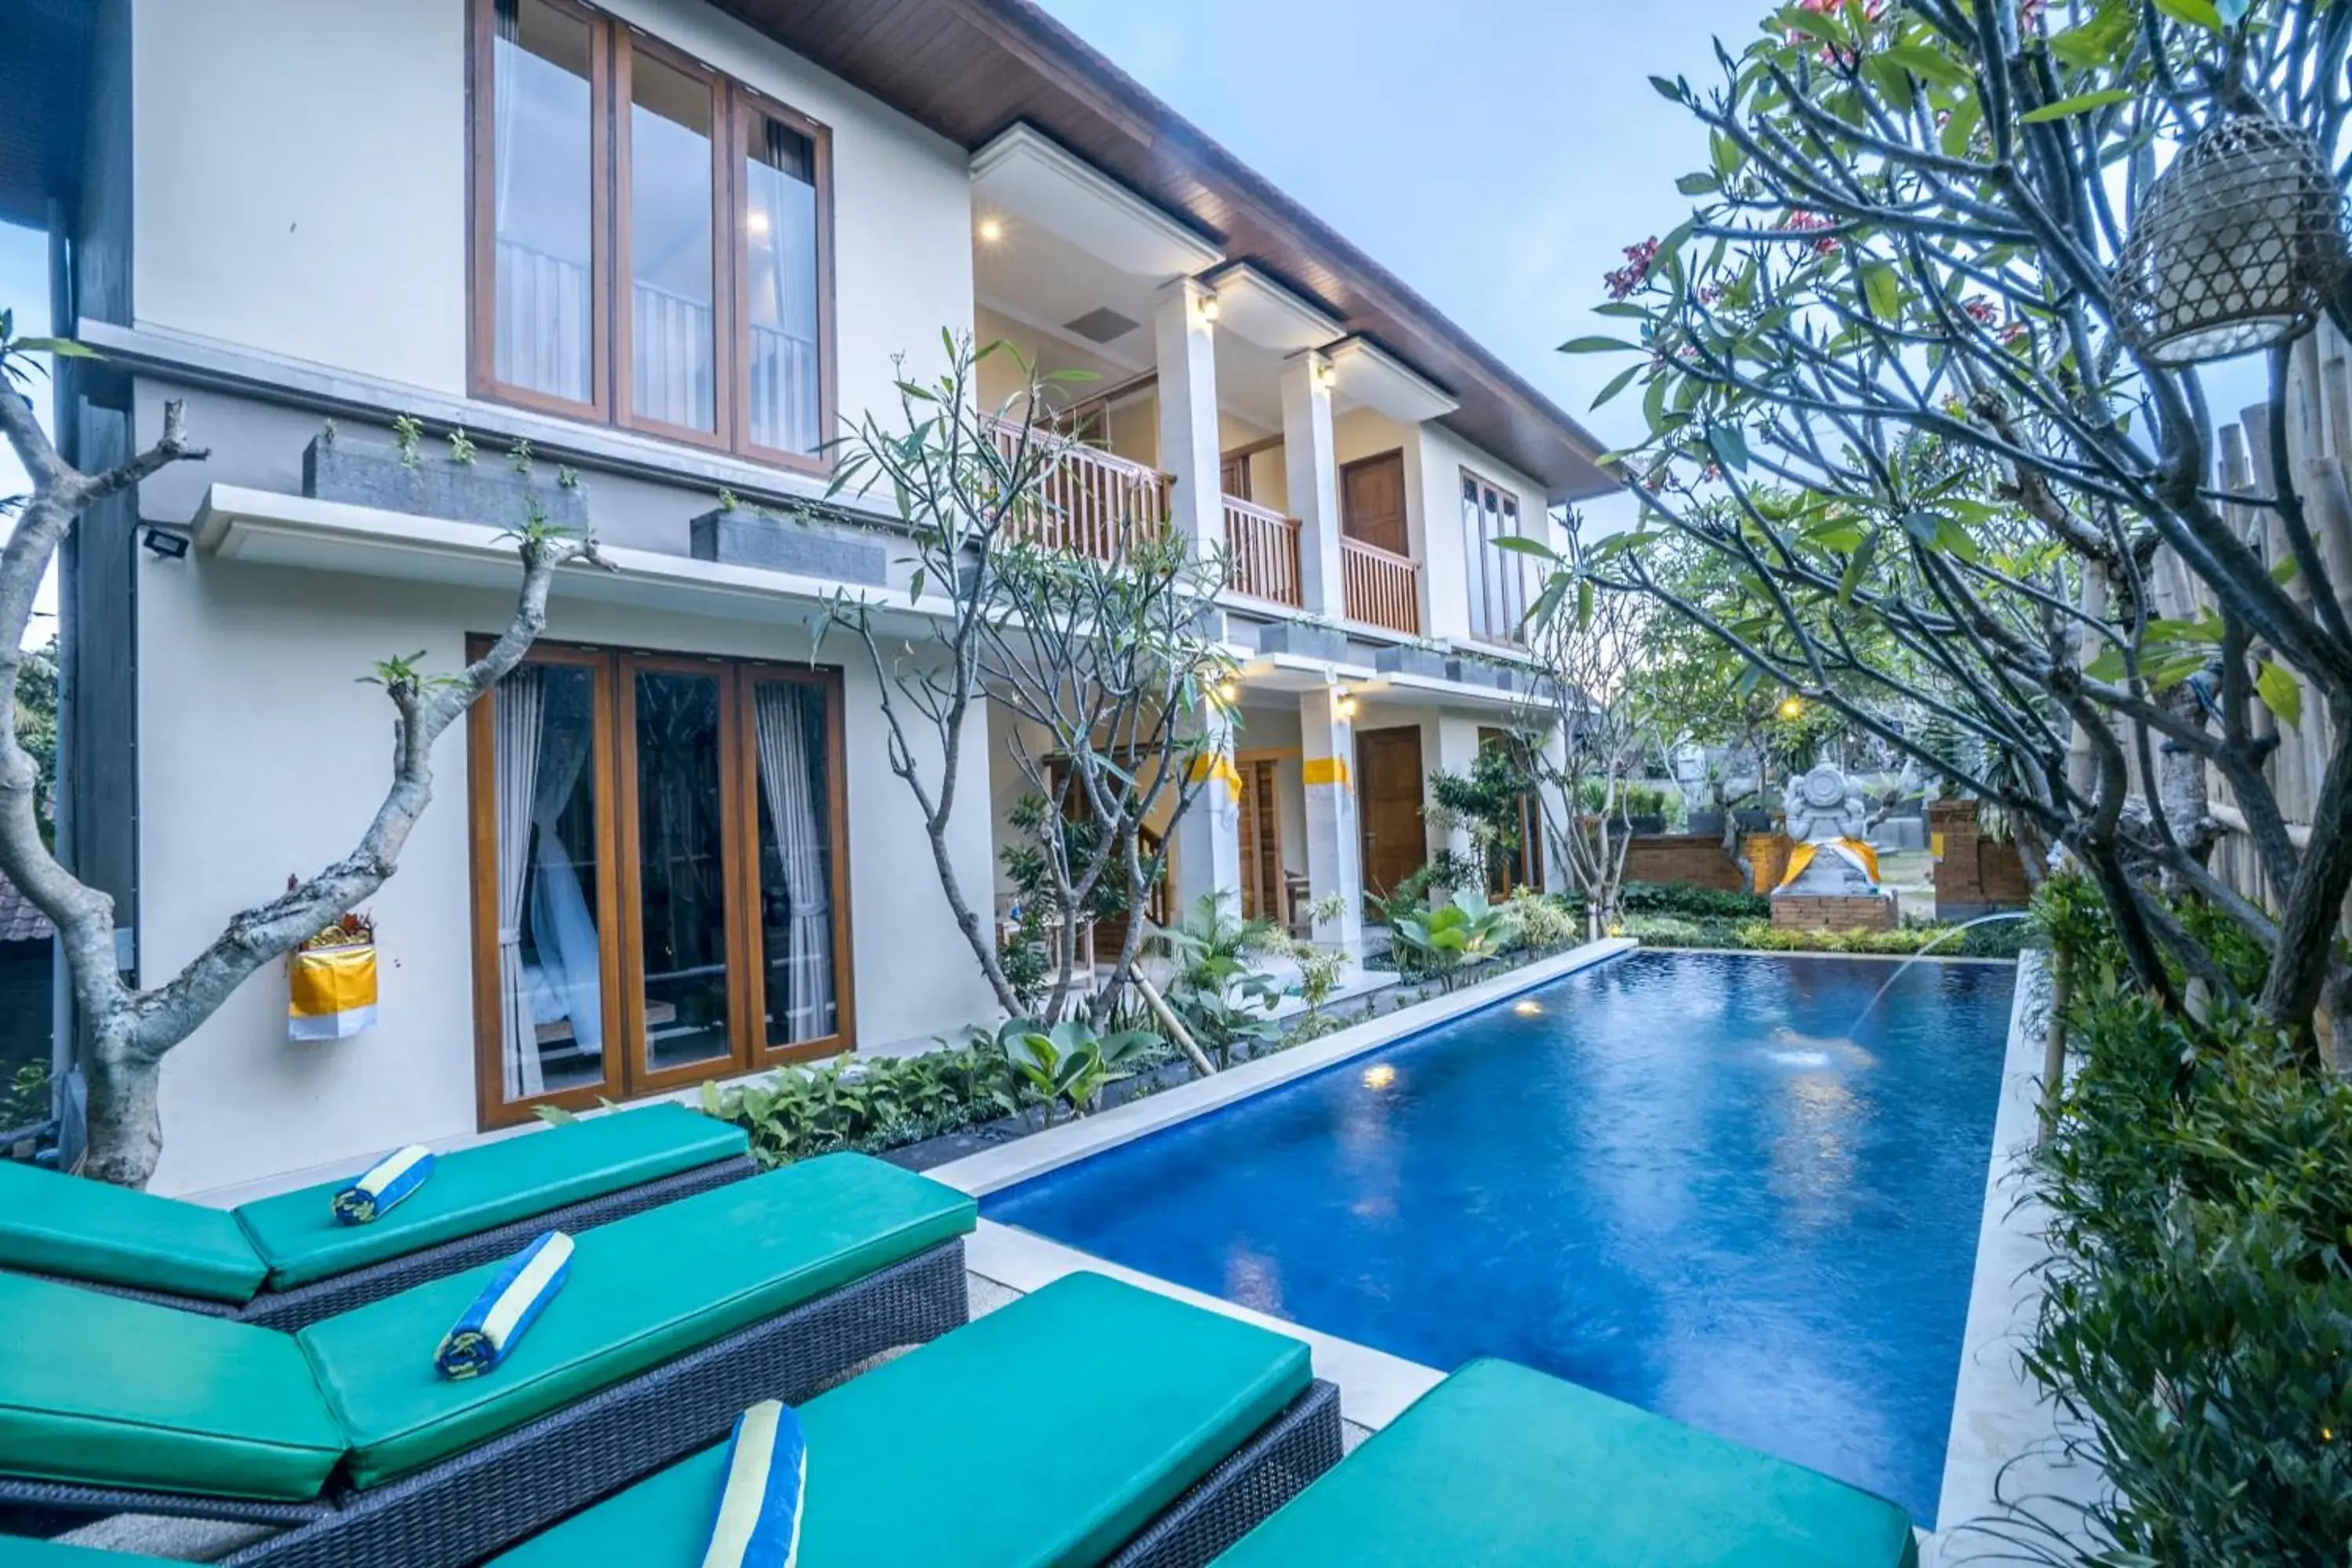 Swimming pool, Property Building in Ubud Tropical Garden 2